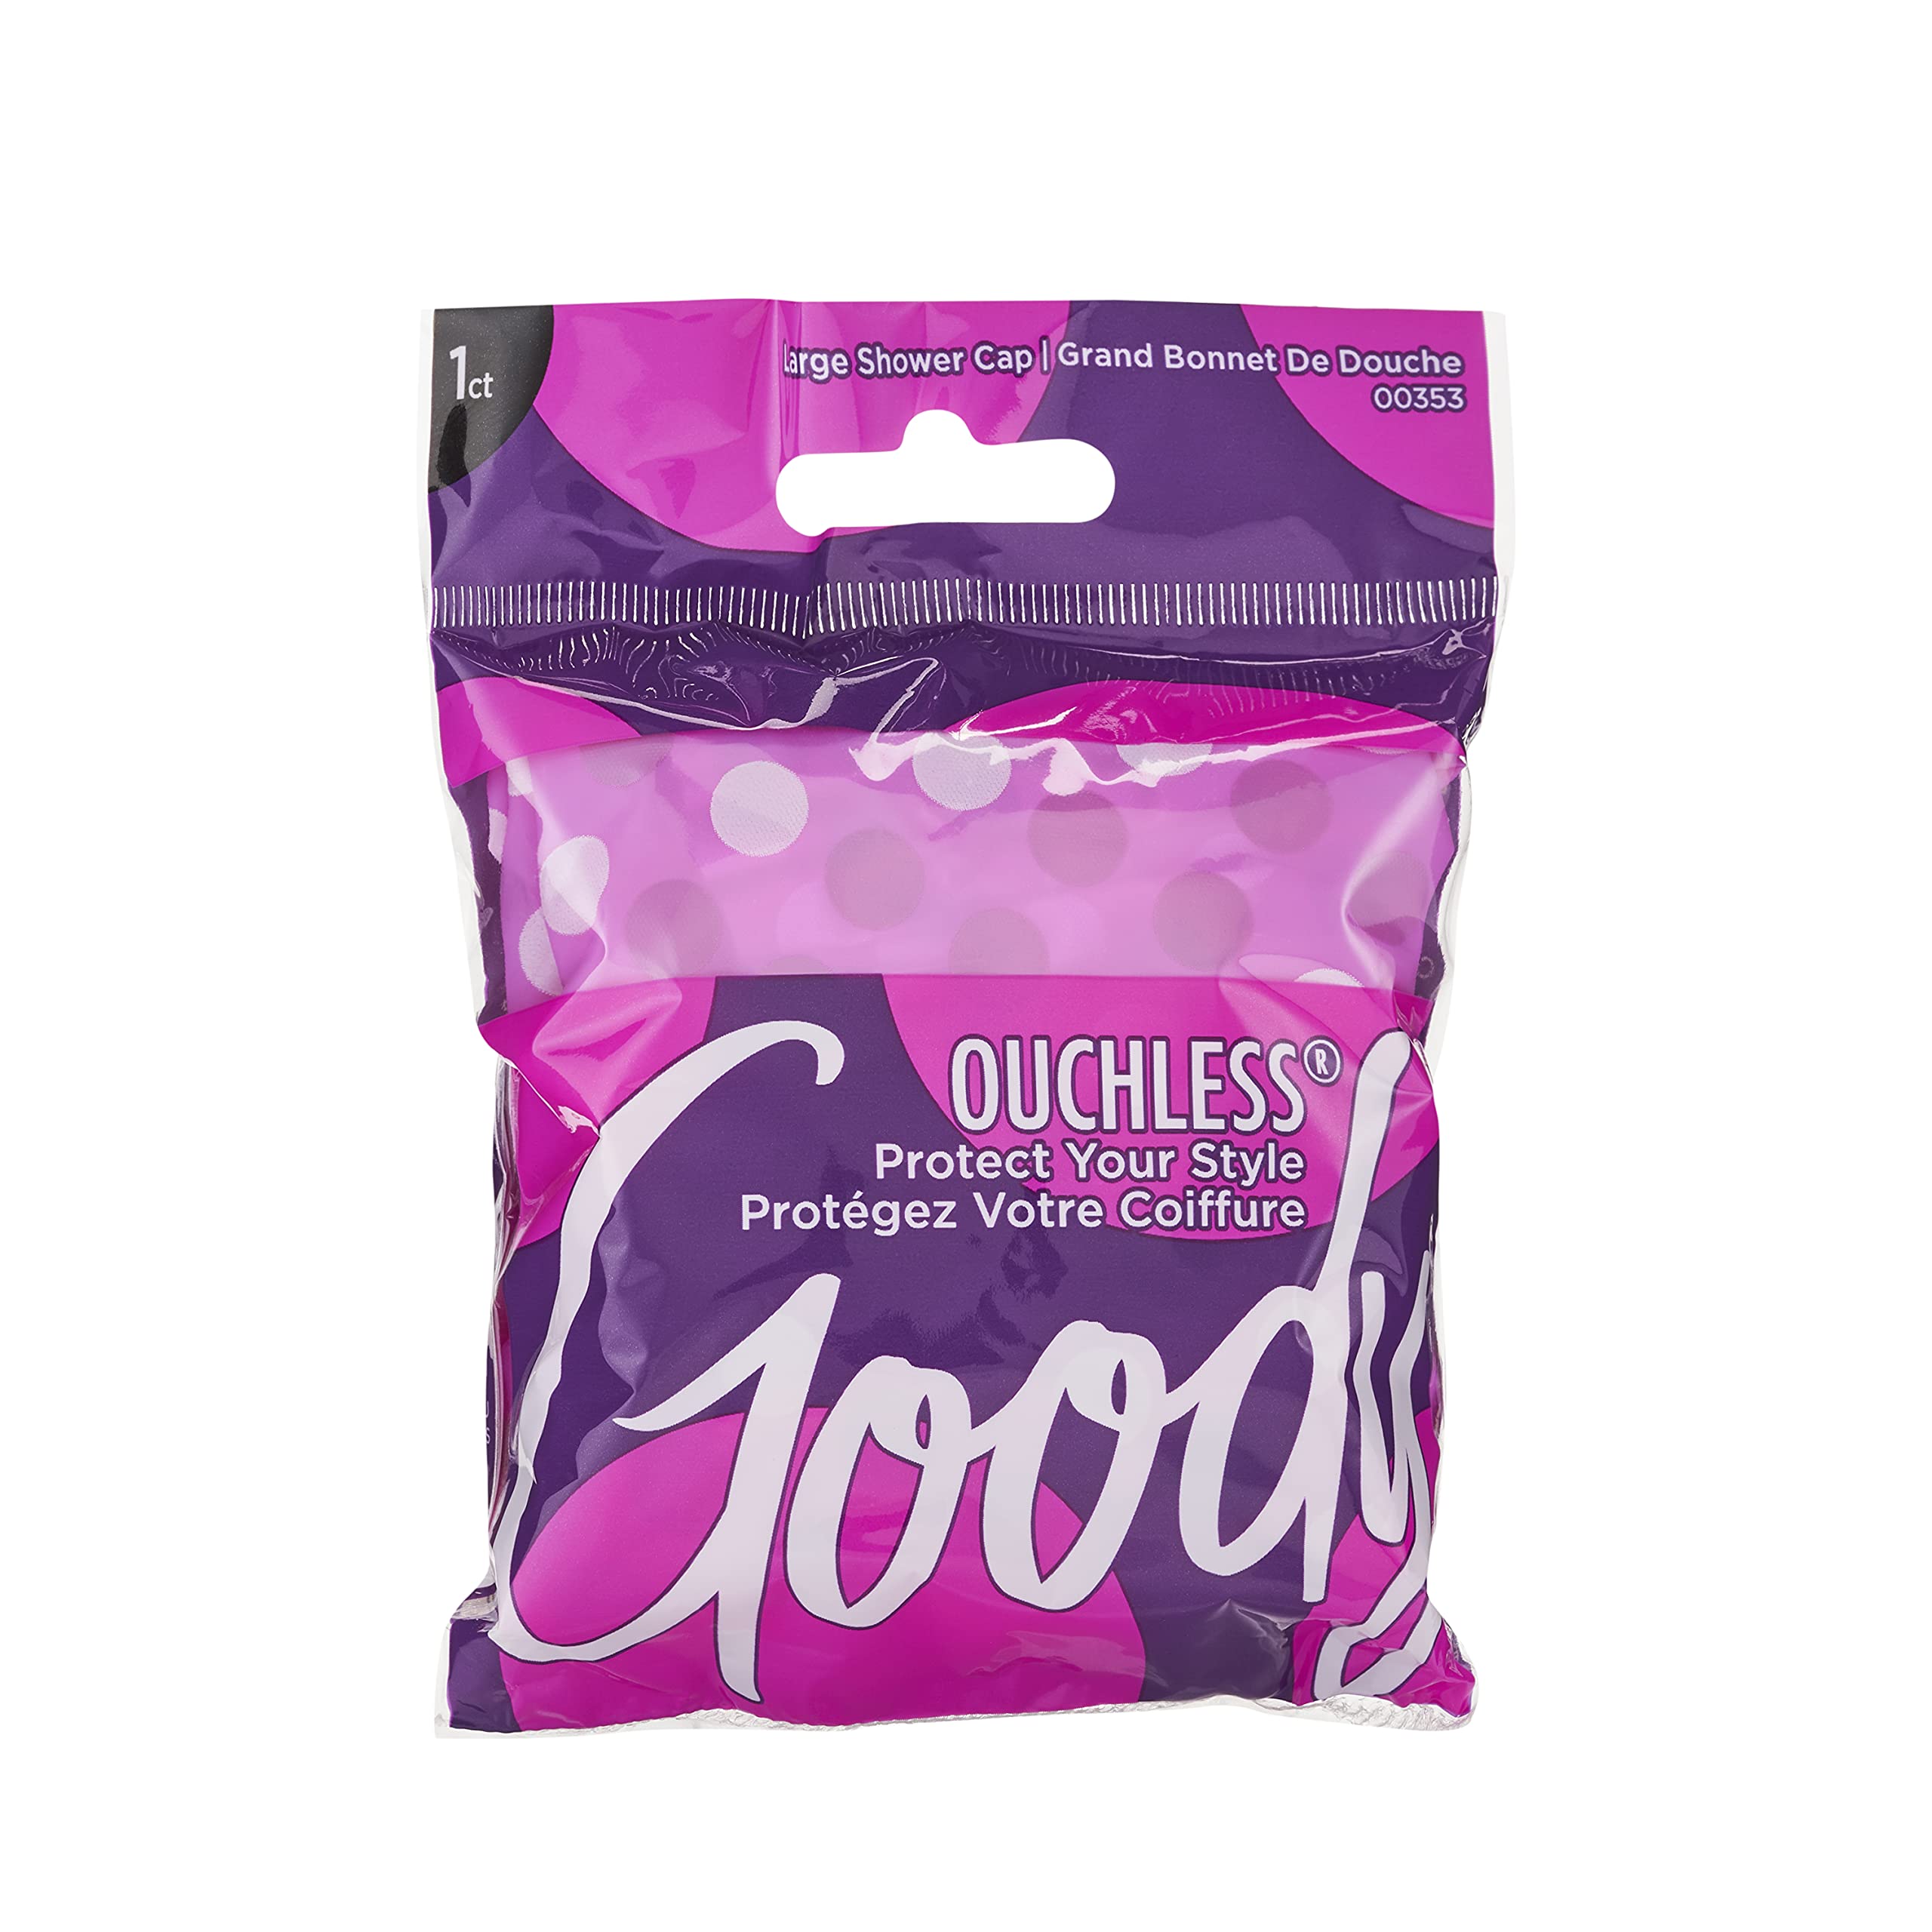 Goody Styling Essentials Shower Cap, 1 Count - Protect Your Hairstyle While Remaining Comfortable - Made with Durable and Waterproof Materials - Hair Accessories for Men, Women, Boys, and Girls